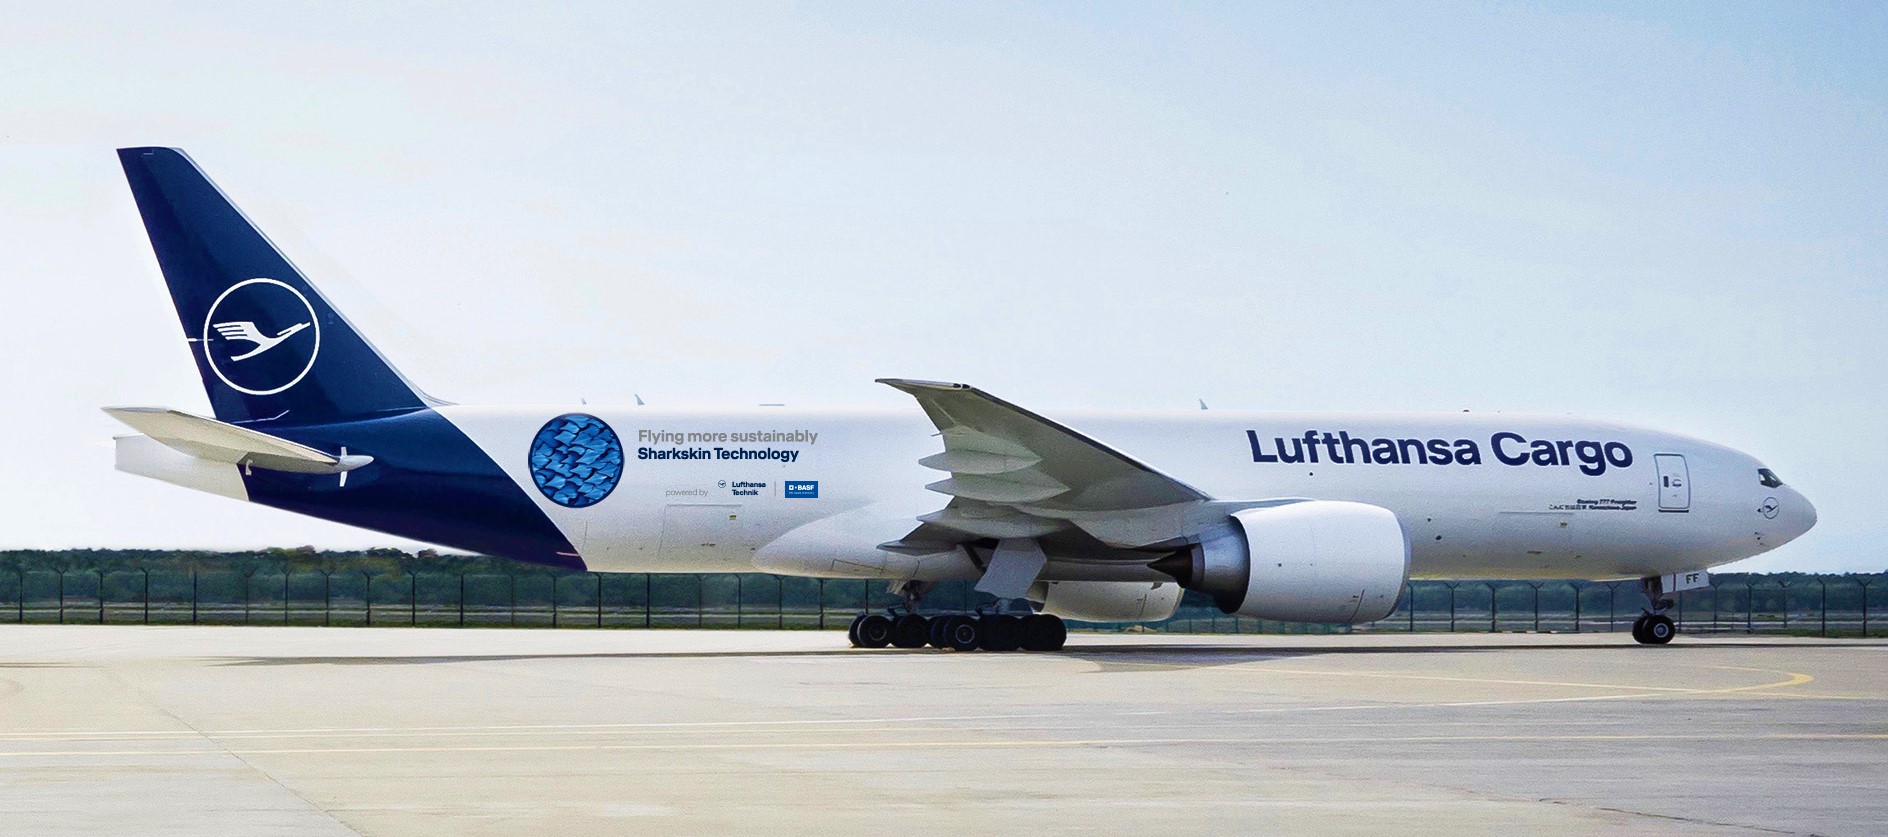 What  is  this  much  discussed  sharkskin  technology  Lufthansa  adopting  on  it's Freighters  ?   How does it Look like ? 